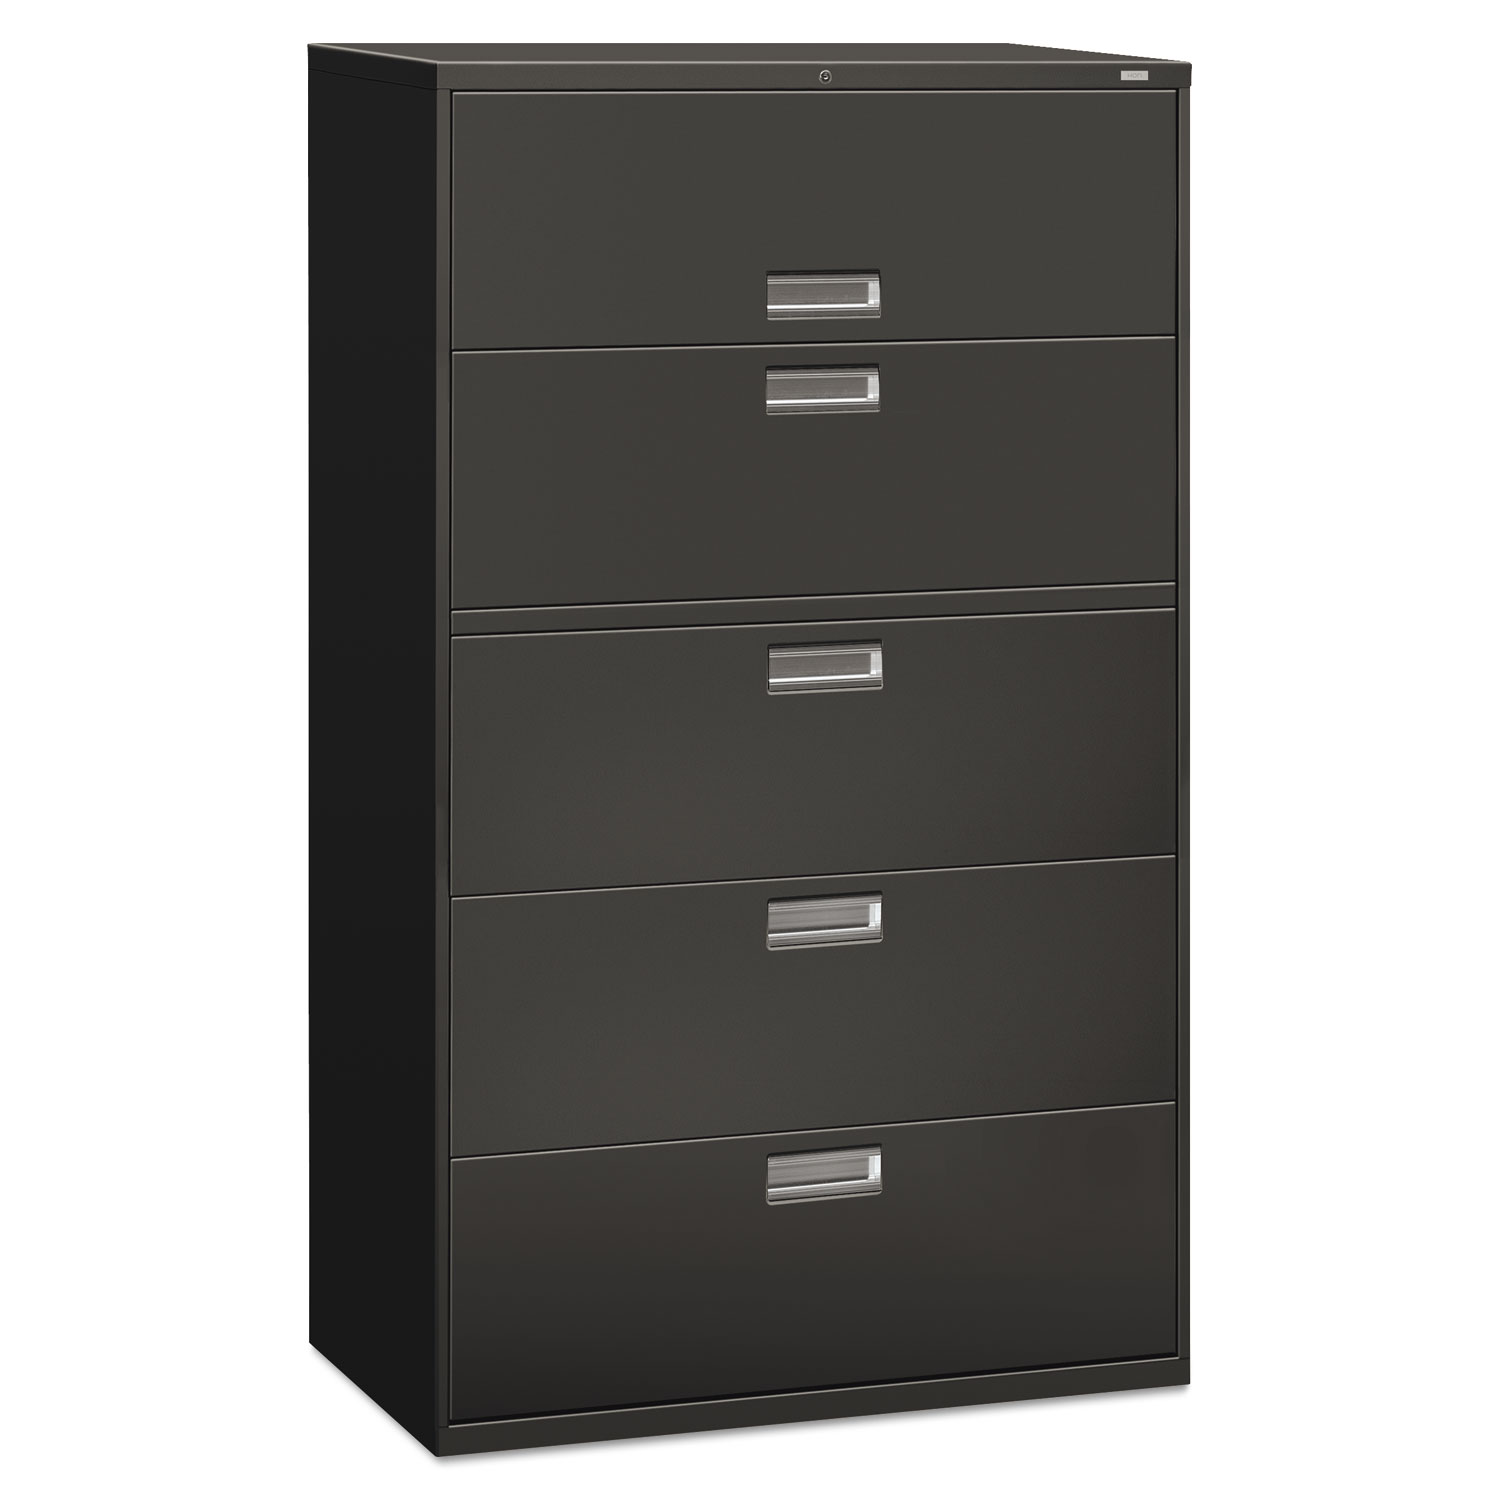  HON H695.L.S 600 Series Five-Drawer Lateral File, 42w x 18d x 64.25h, Charcoal (HON695LS) 